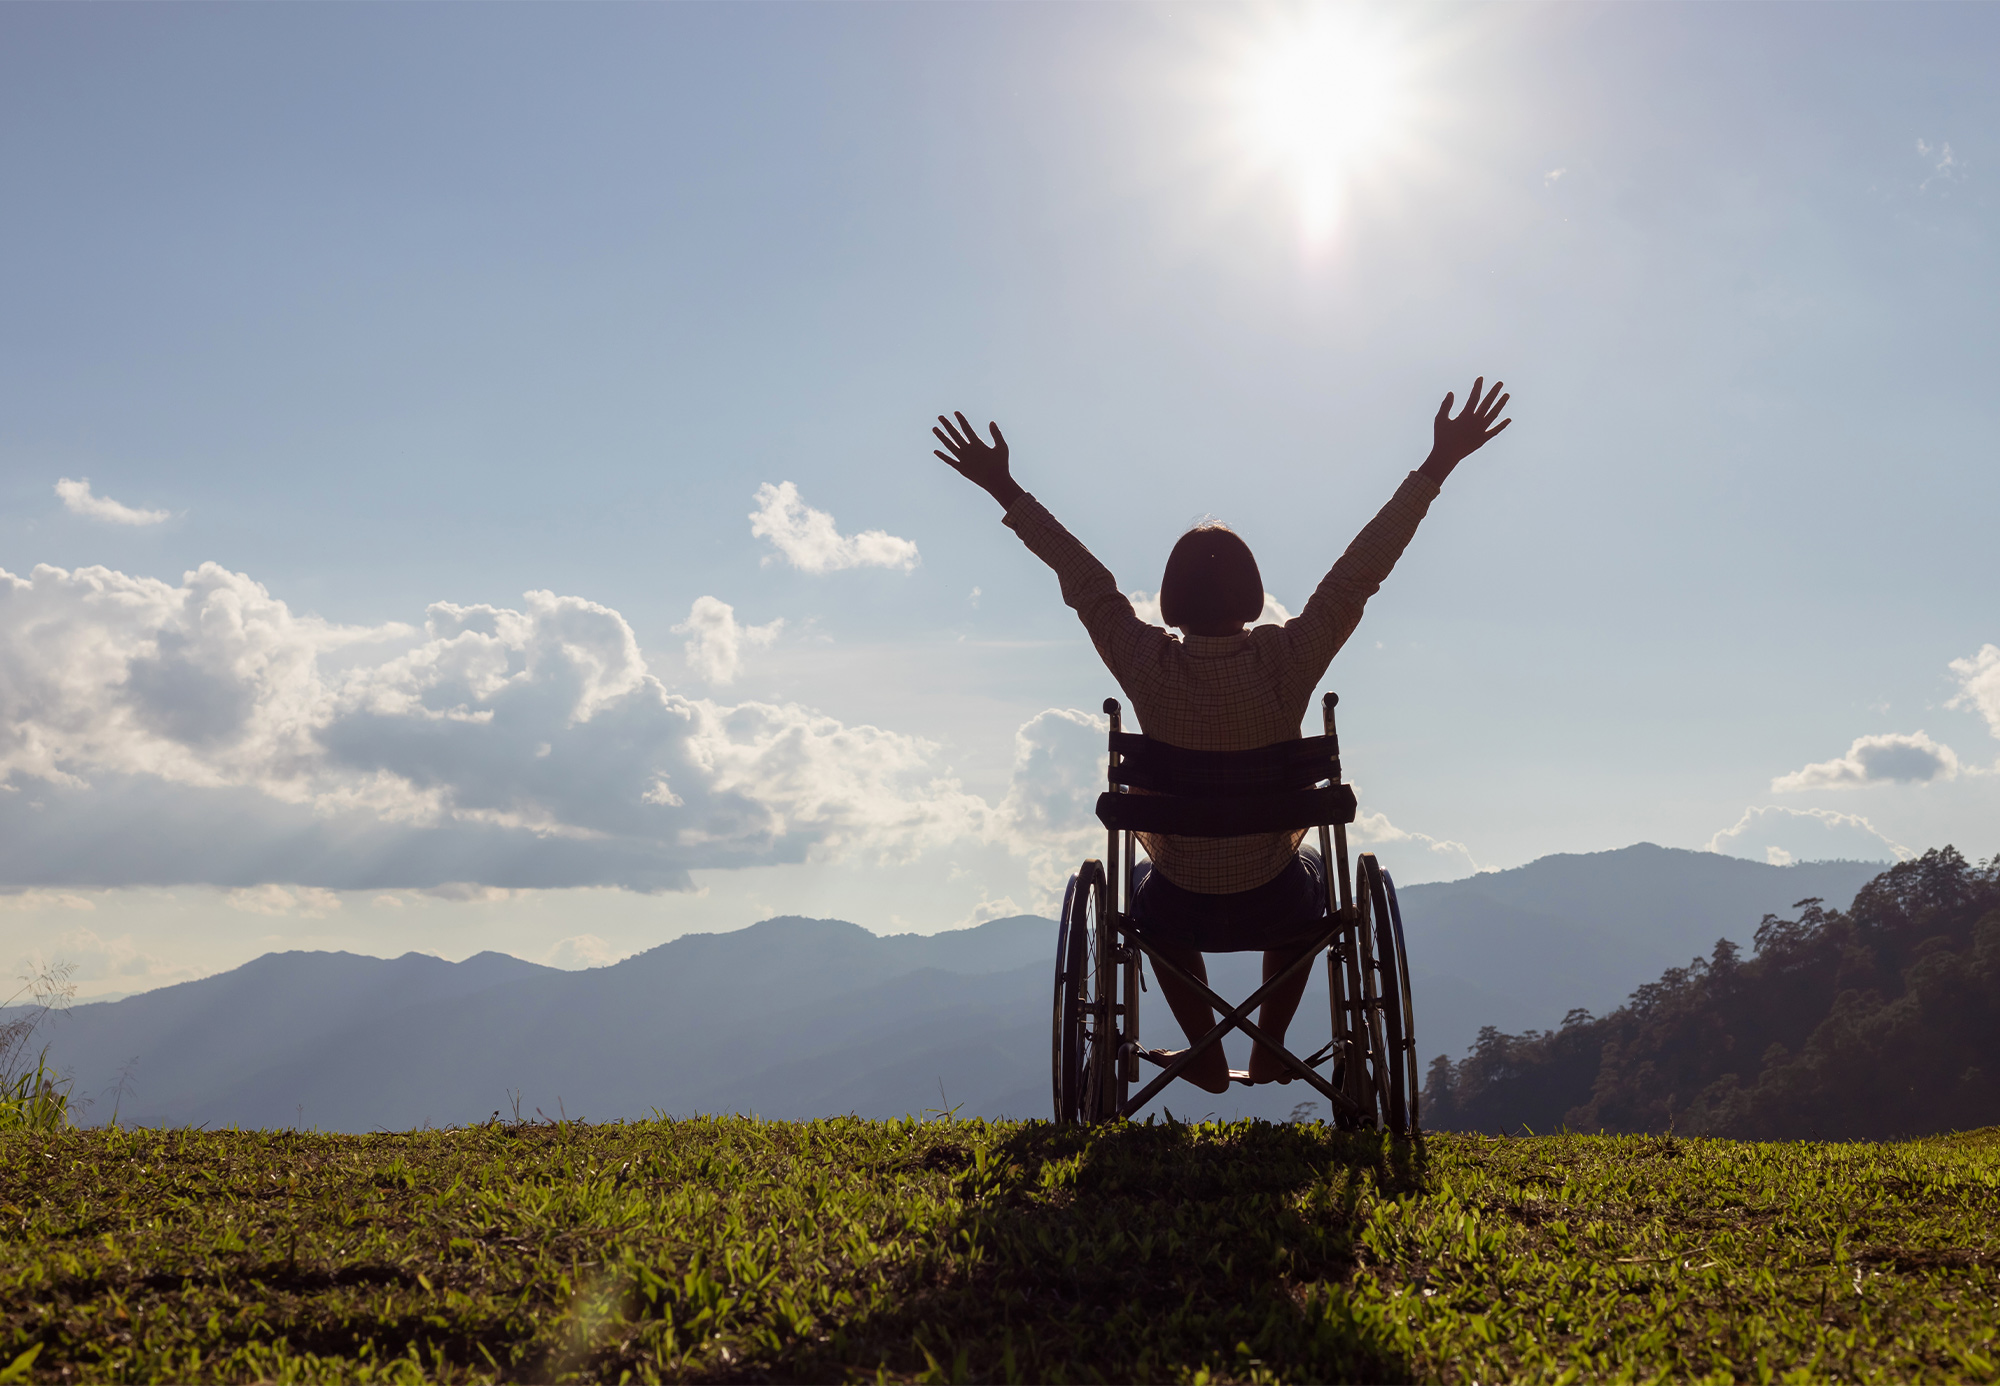 A disabled woman in a wheelchair with her hands in the air happily on a hill, surrounded by a landscape view